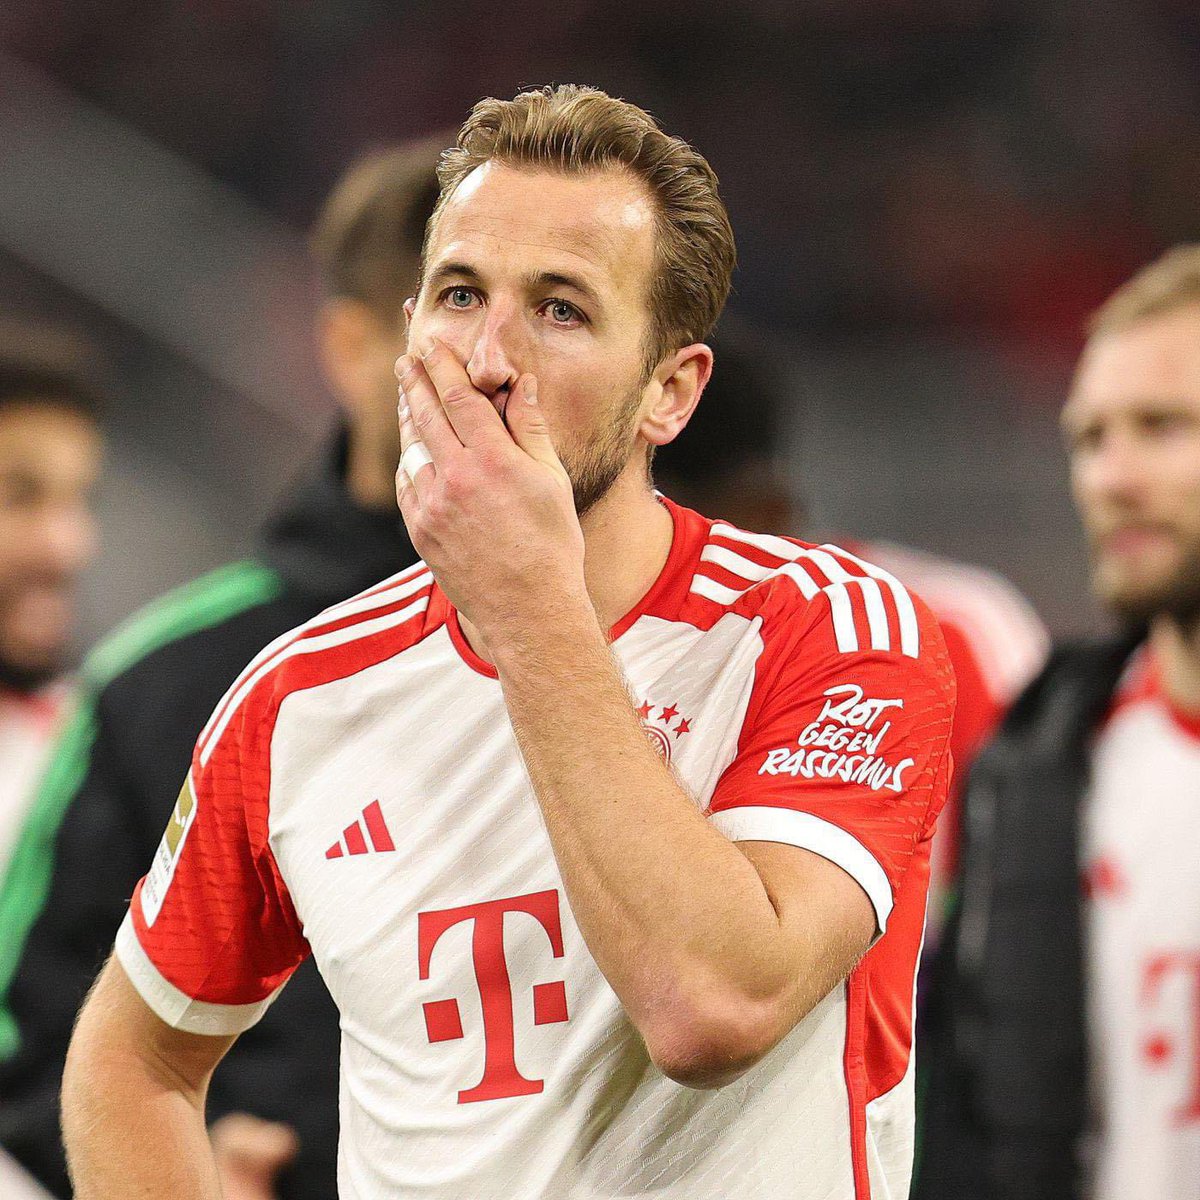 ❌ Bundesliga ❌ Champions League ❌ DFB Pokal Harry Kane's trophy drought continues! Despite another strong season, the 30-year-old forward ends the campaign without any major titles.. 😞 #SportDm #RMAFCB